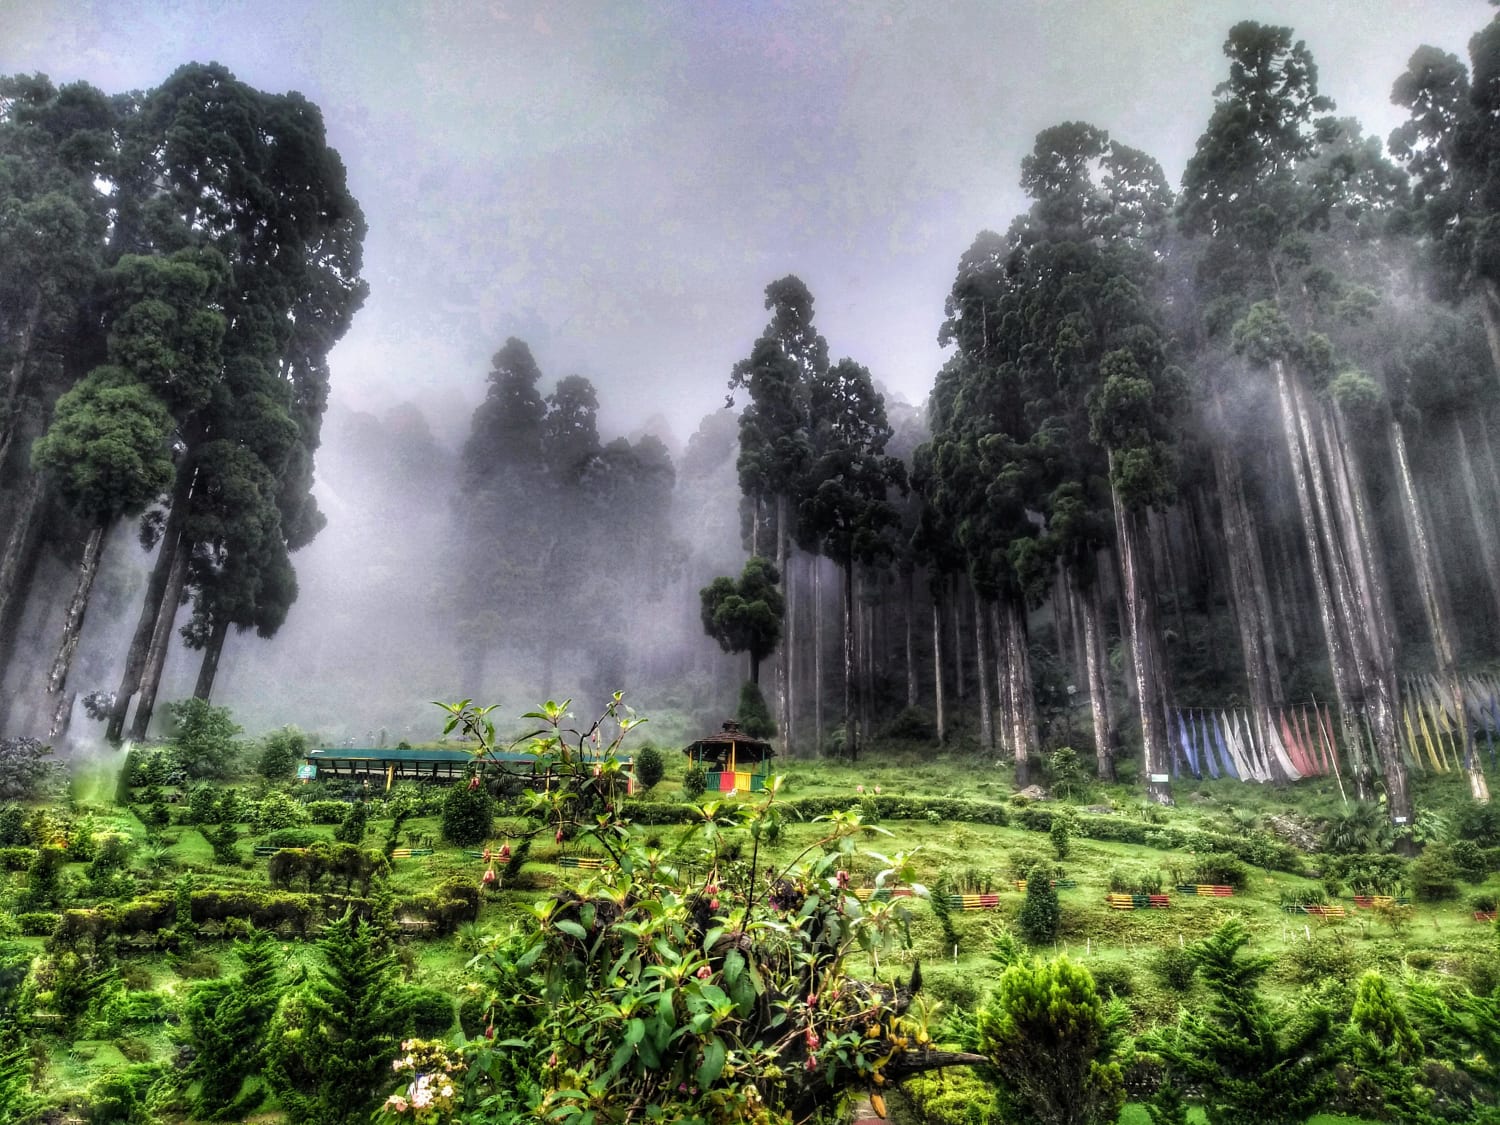 A chilly morning in Darjeeling, West Bengal, India during the Monsoon season